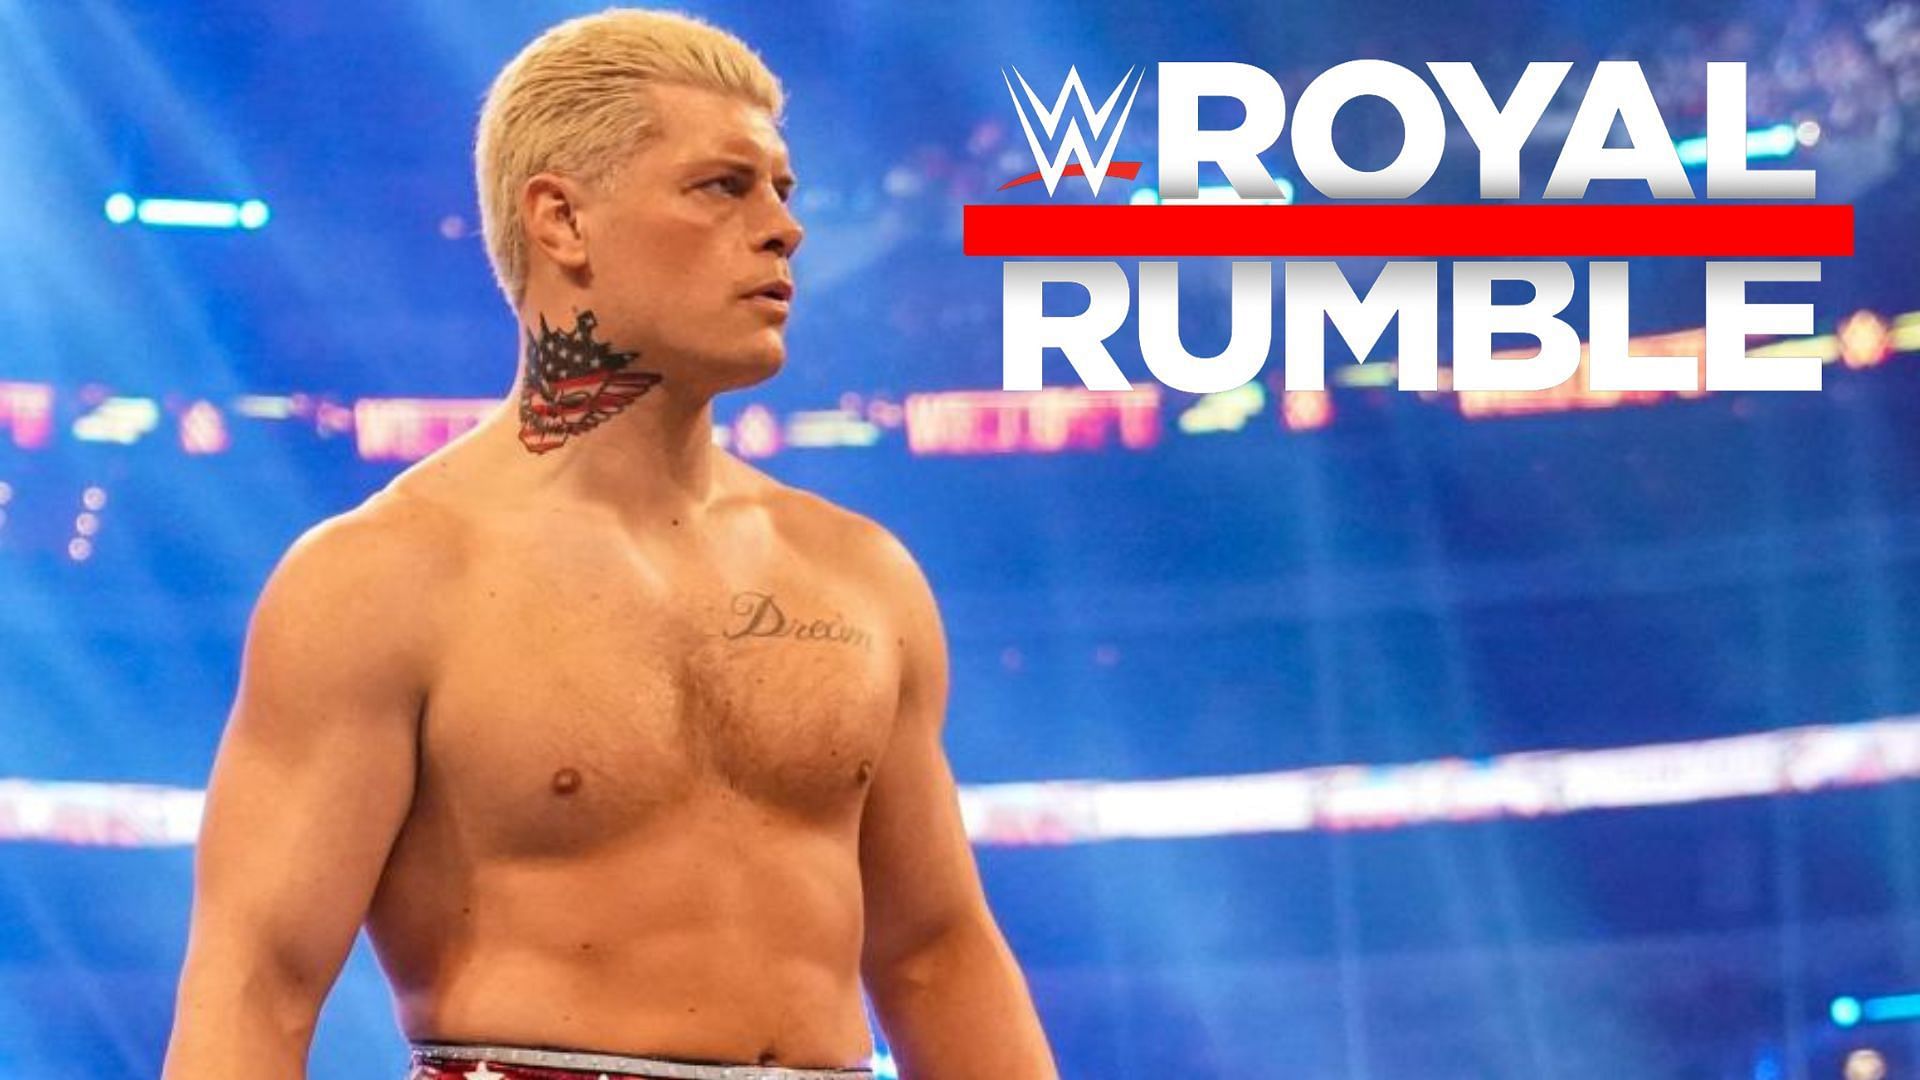 "I don't give a f**k" - Cody Rhodes' friend on being spotted backstage at WWE Royal Rumble this year